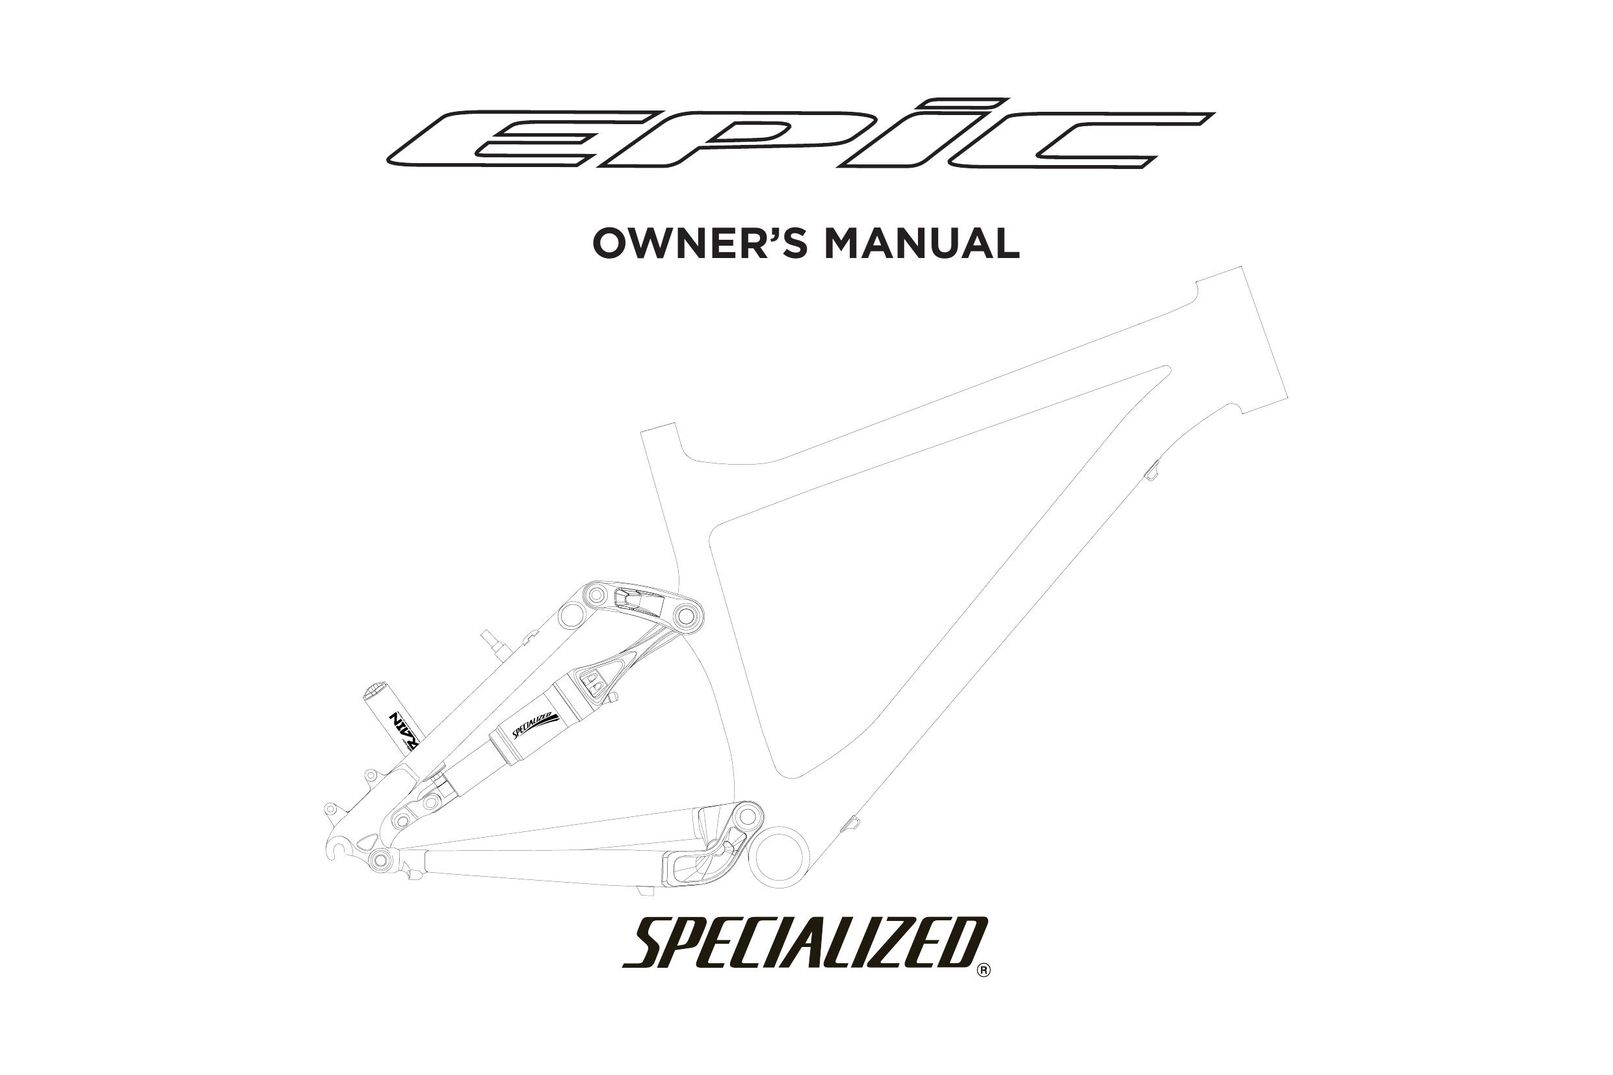 Specialized Roll X Home Gym User Manual